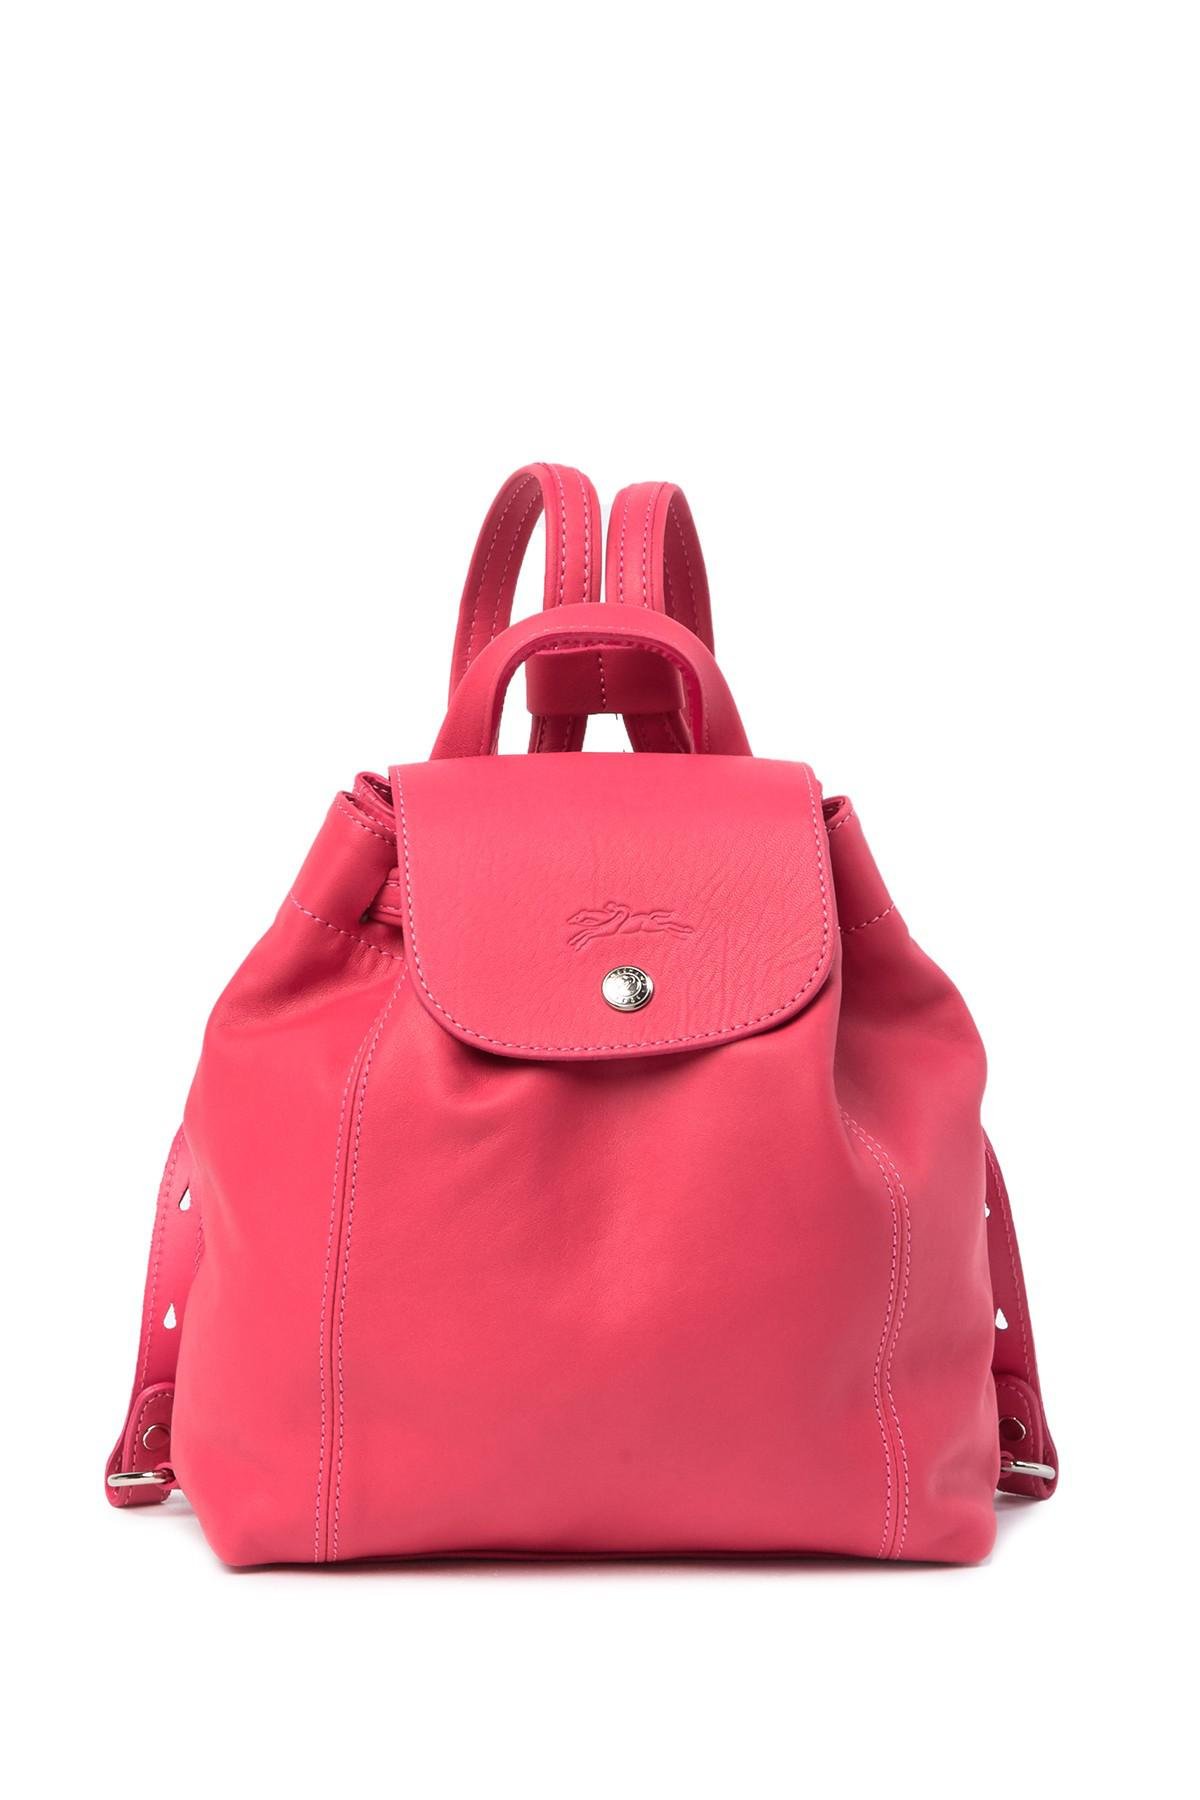 Longchamp Le Pliage Mini Cr Leather Backpack in Pink